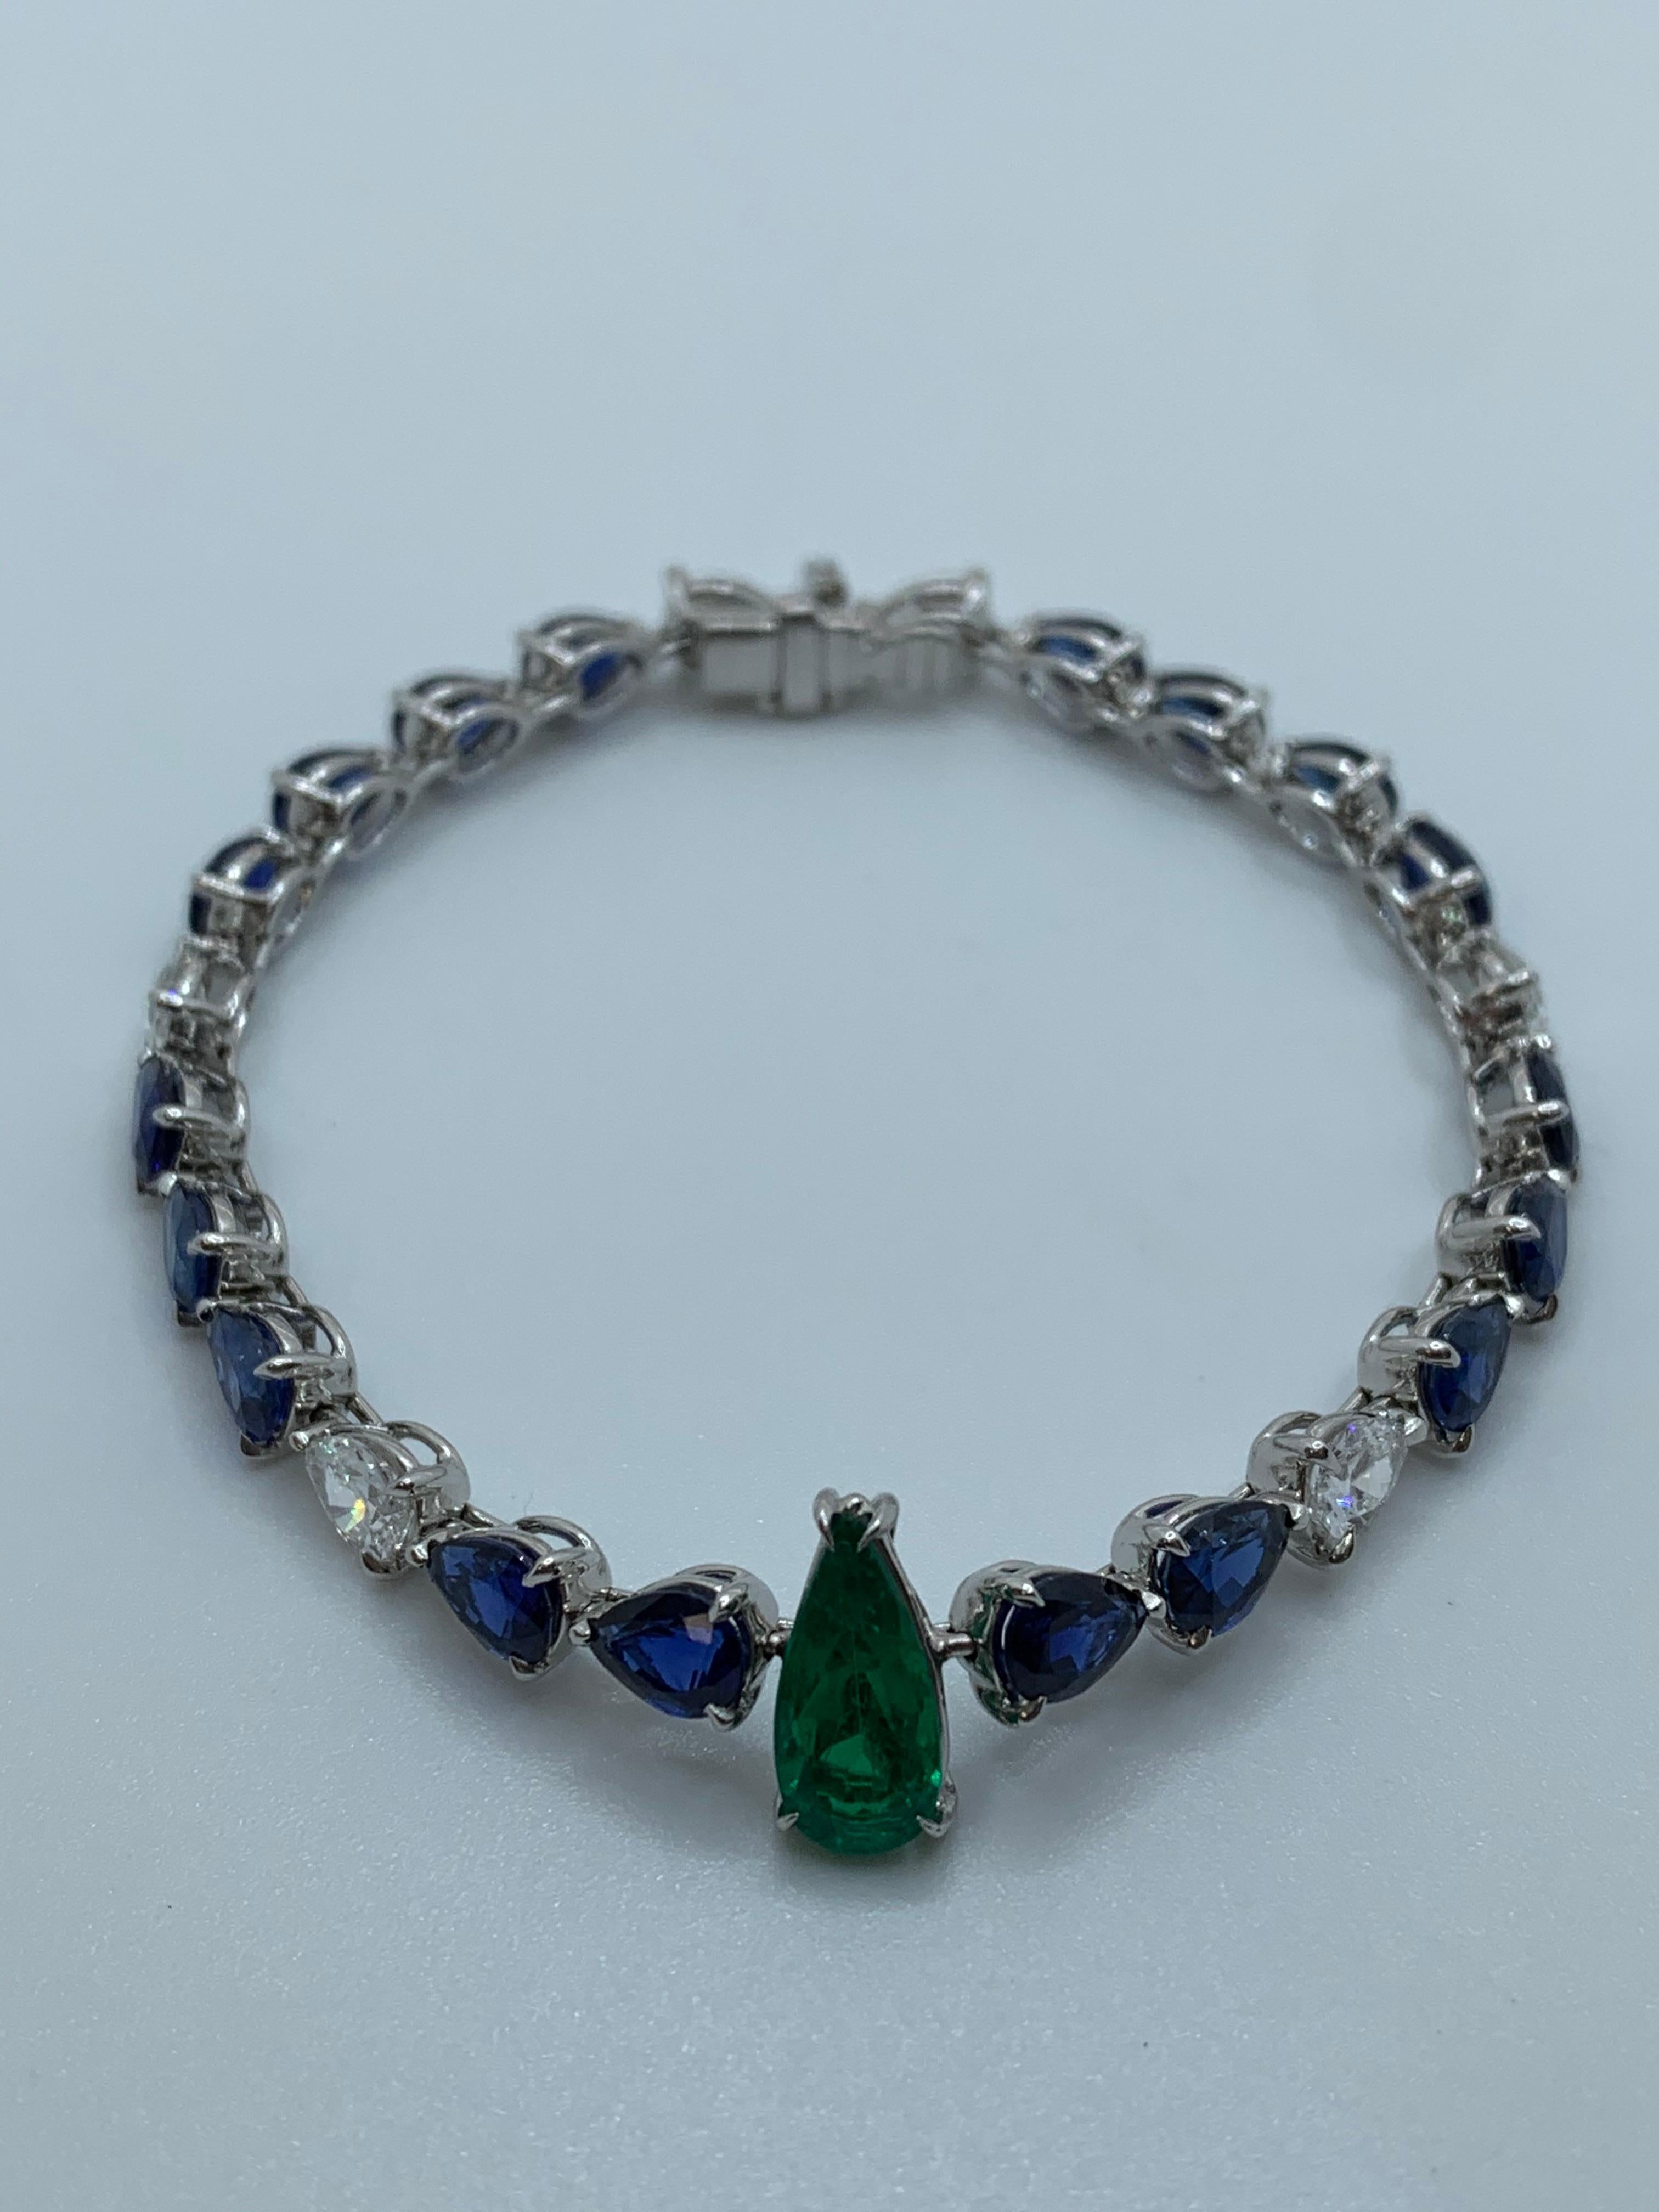 Pear Shaped Emerald, Sapphire and Diamond Necklace. This Bracelet is part of a Suite and can be purchased individually.

Striking Bracelet and color combination. The gorgeous Colombian Emeralds matched with the beautiful Ceylon Sapphires play as if